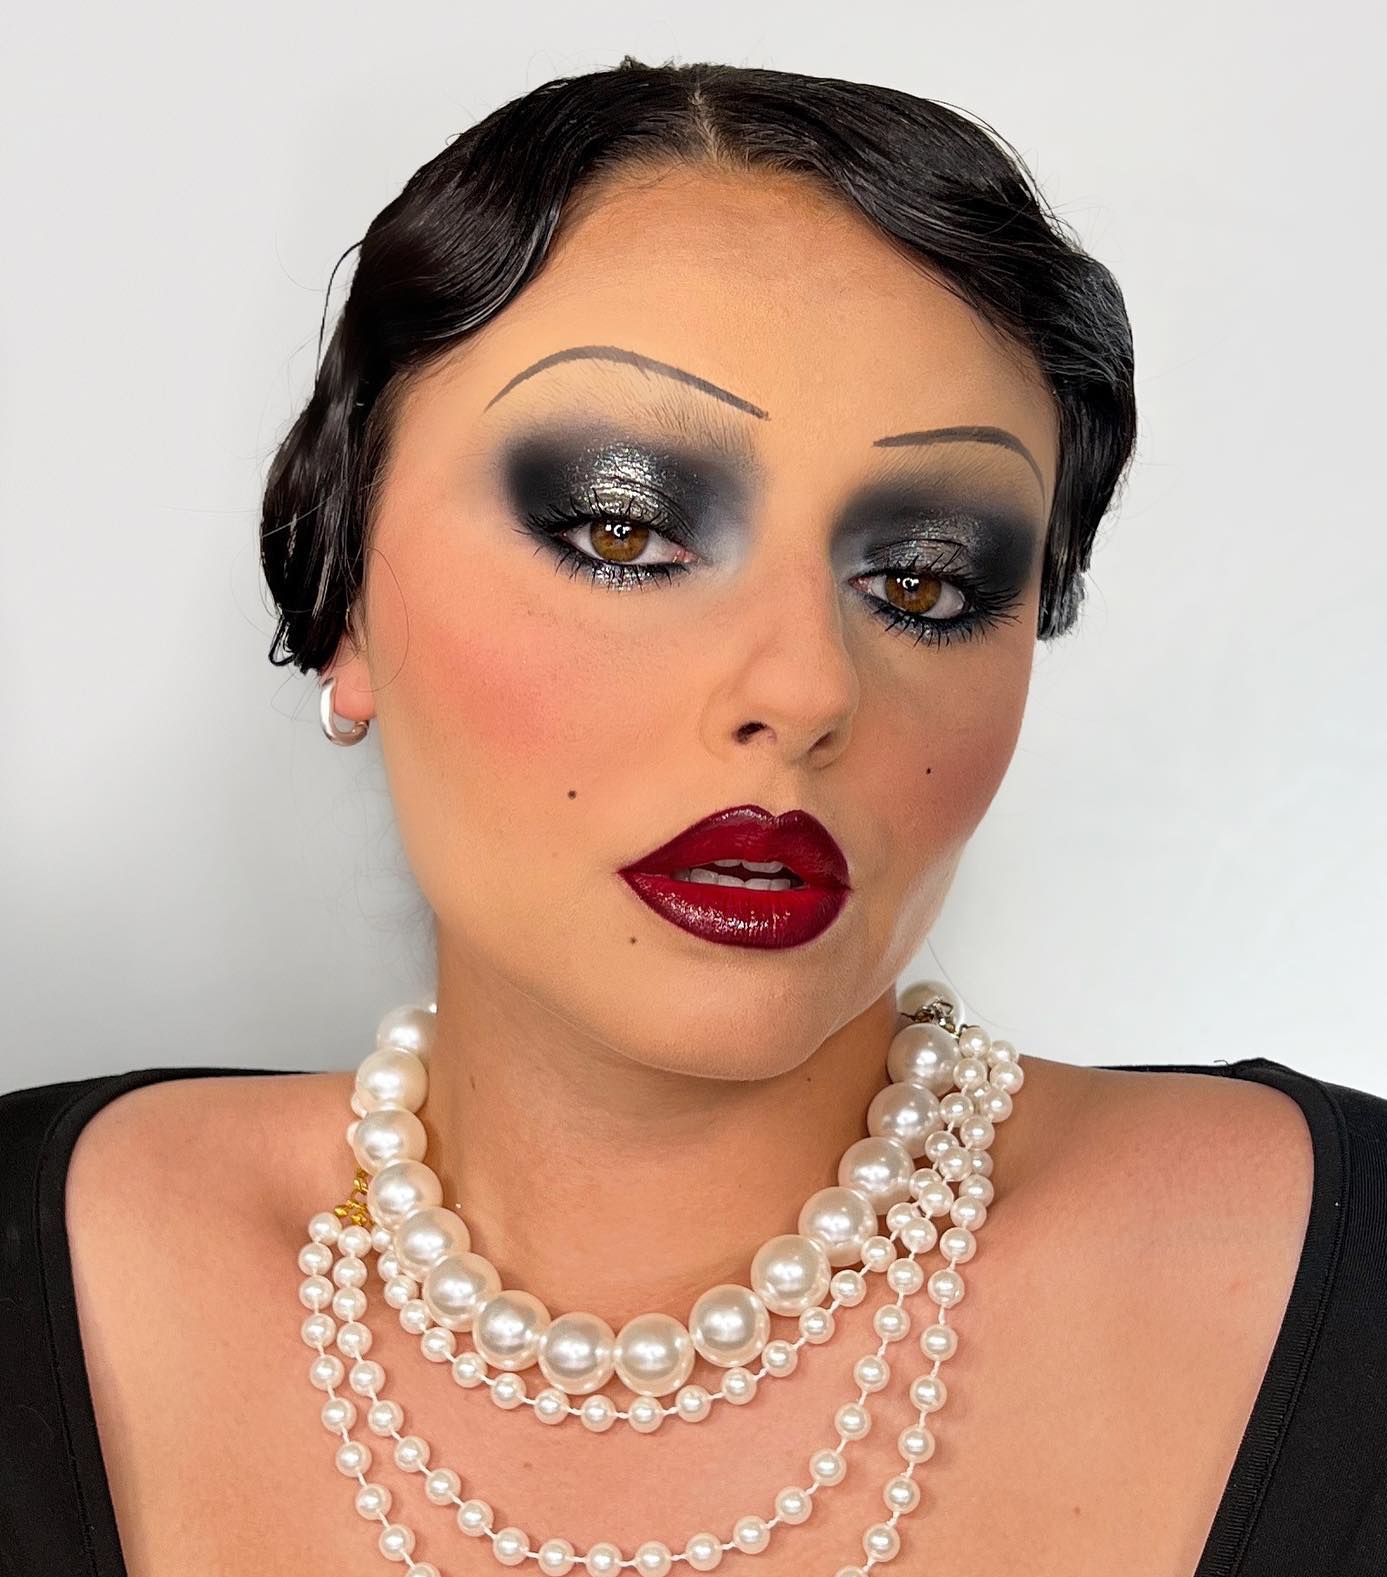 1920s Makeup with Glitter Black Eyeshadow and Dark Red Lips